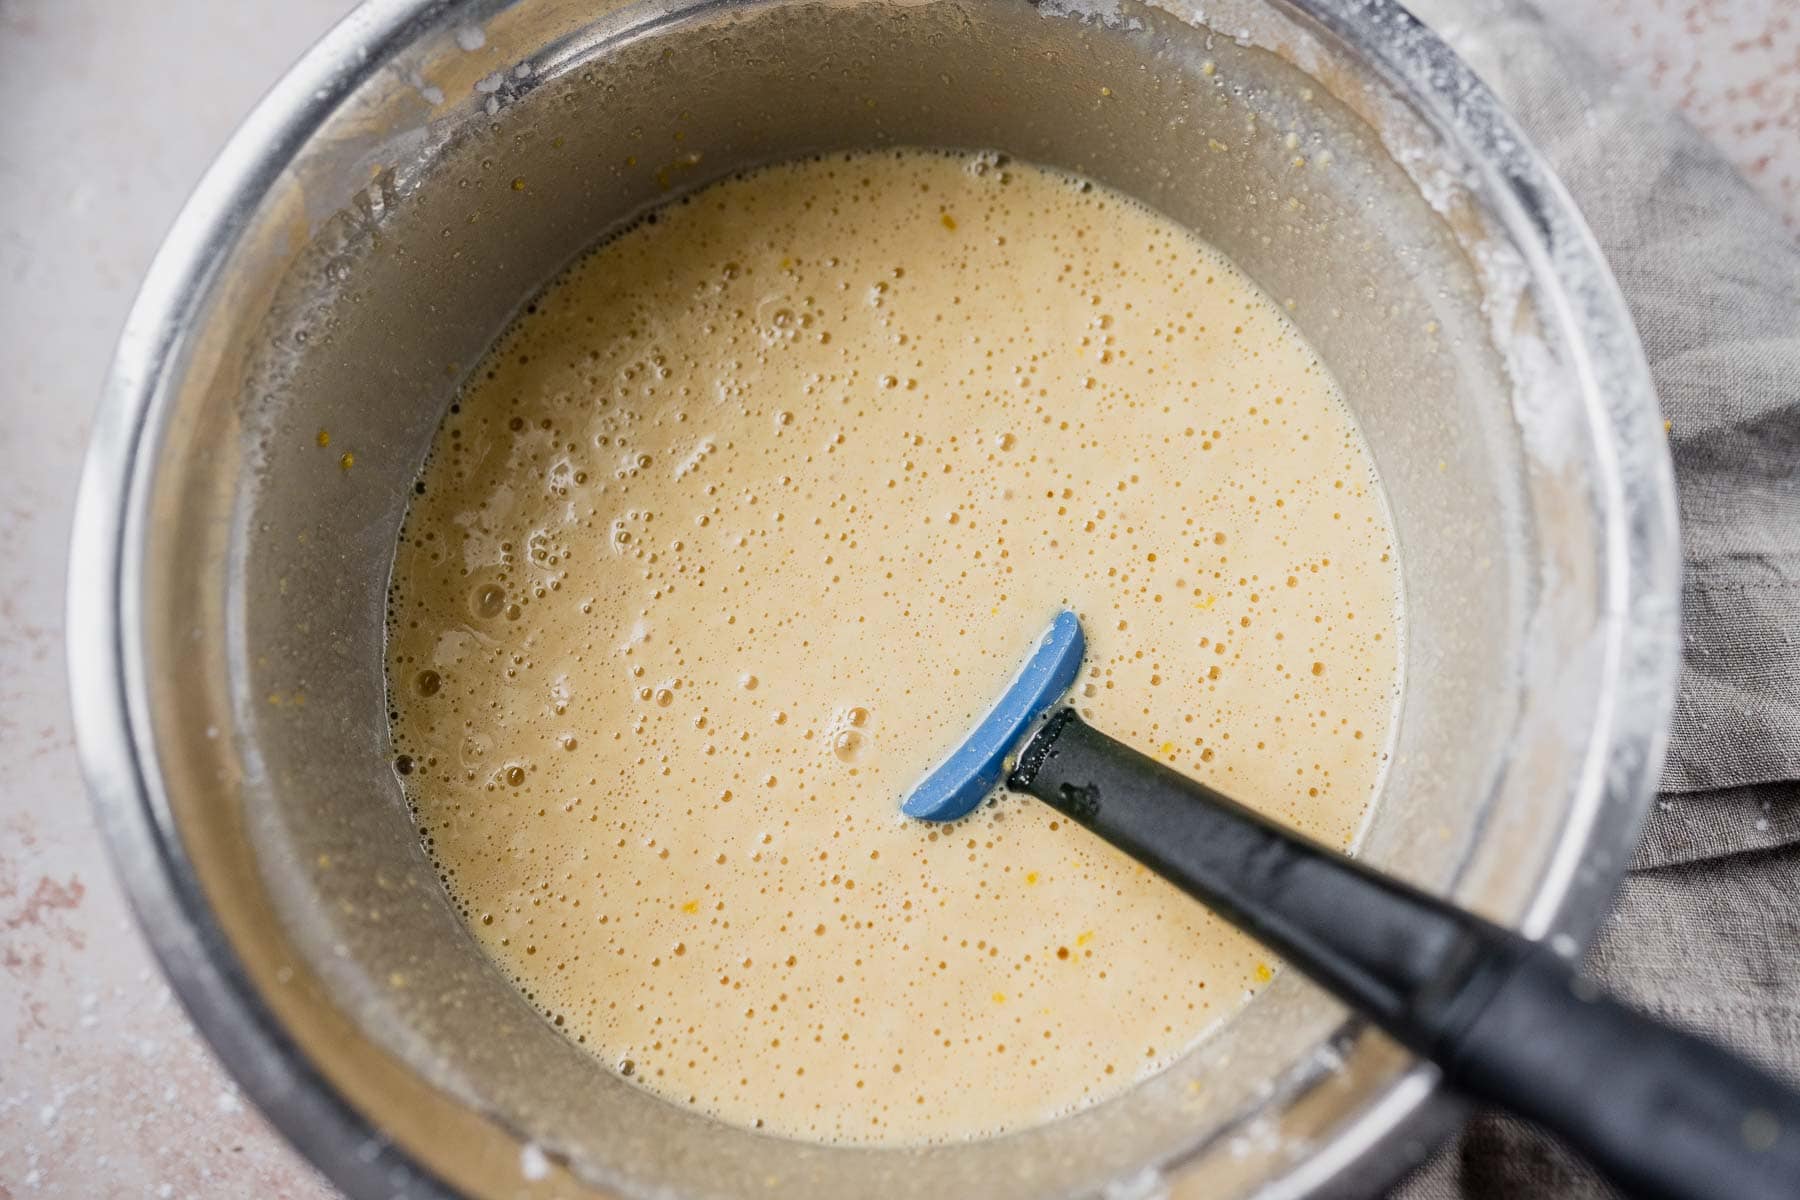 A mixing bowl filled with a light yellow batter.